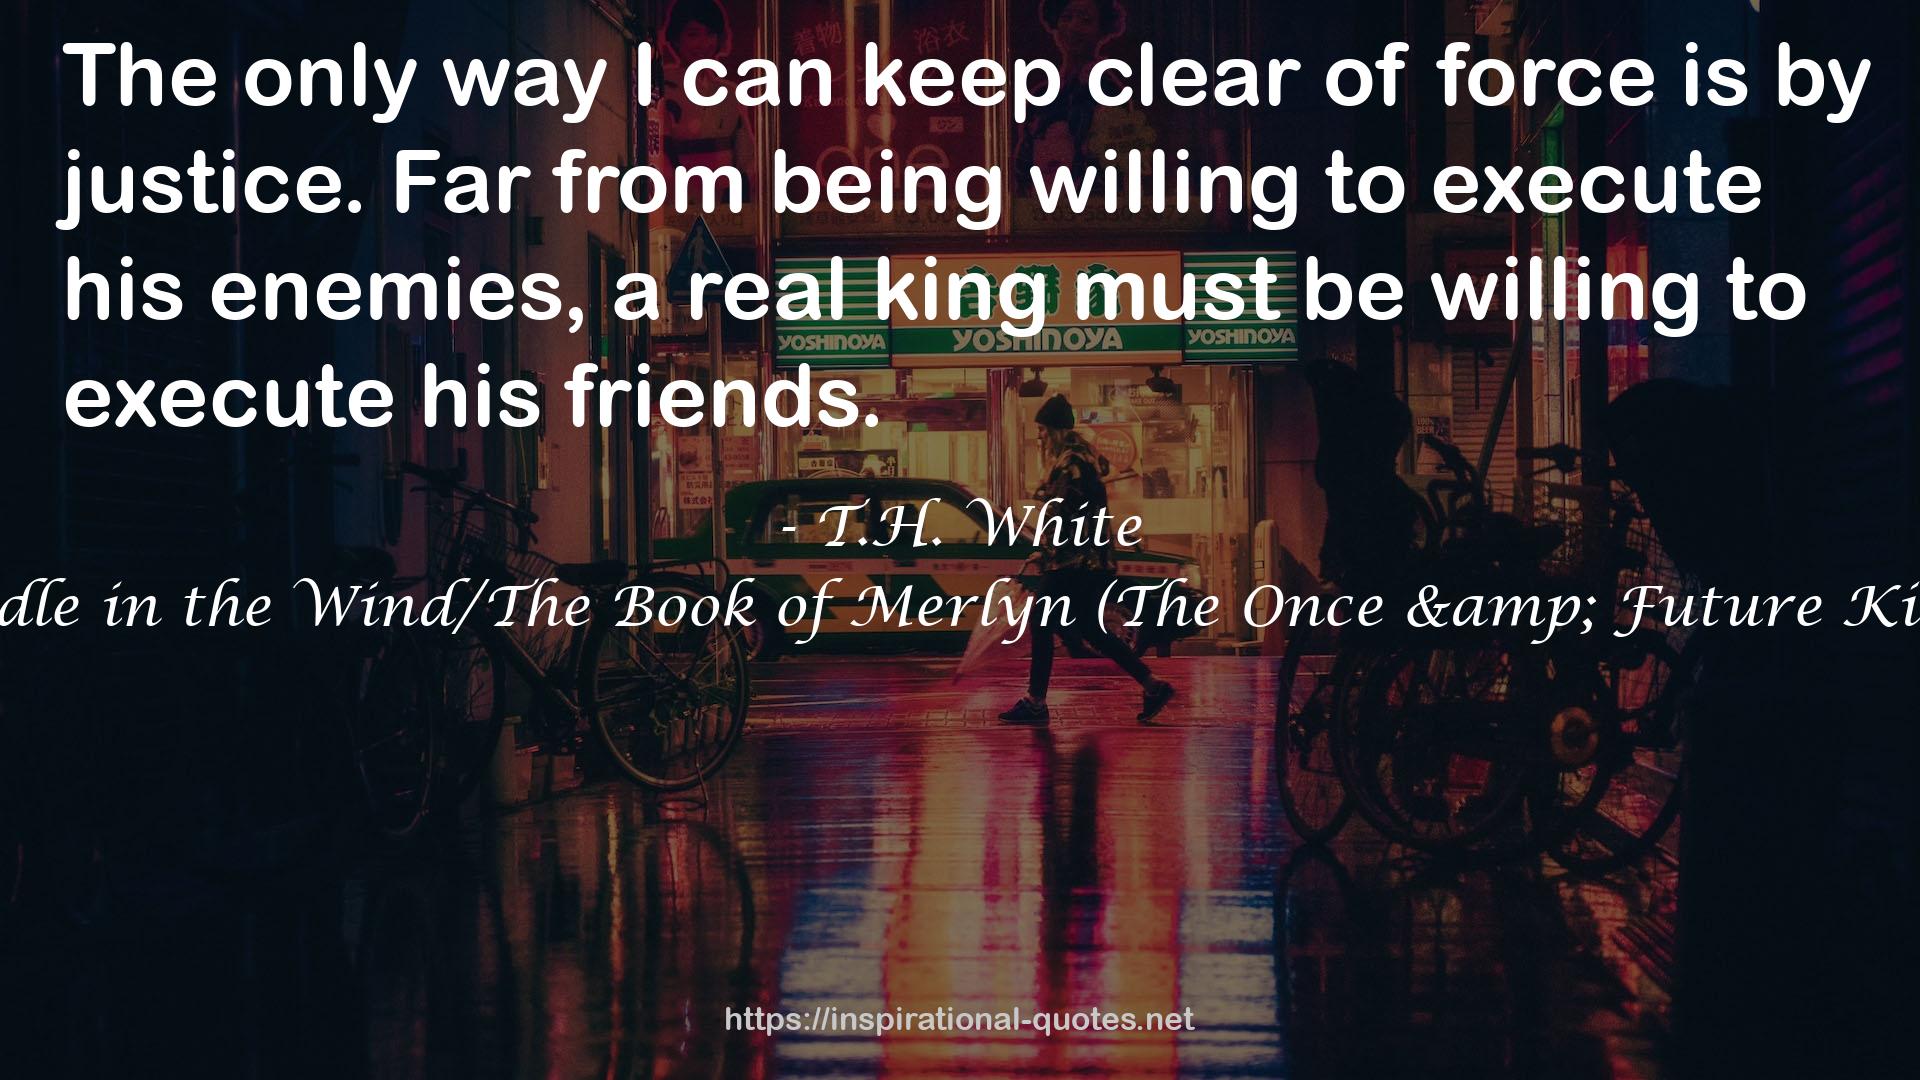 The Candle in the Wind/The Book of Merlyn (The Once & Future King, #4-5) QUOTES